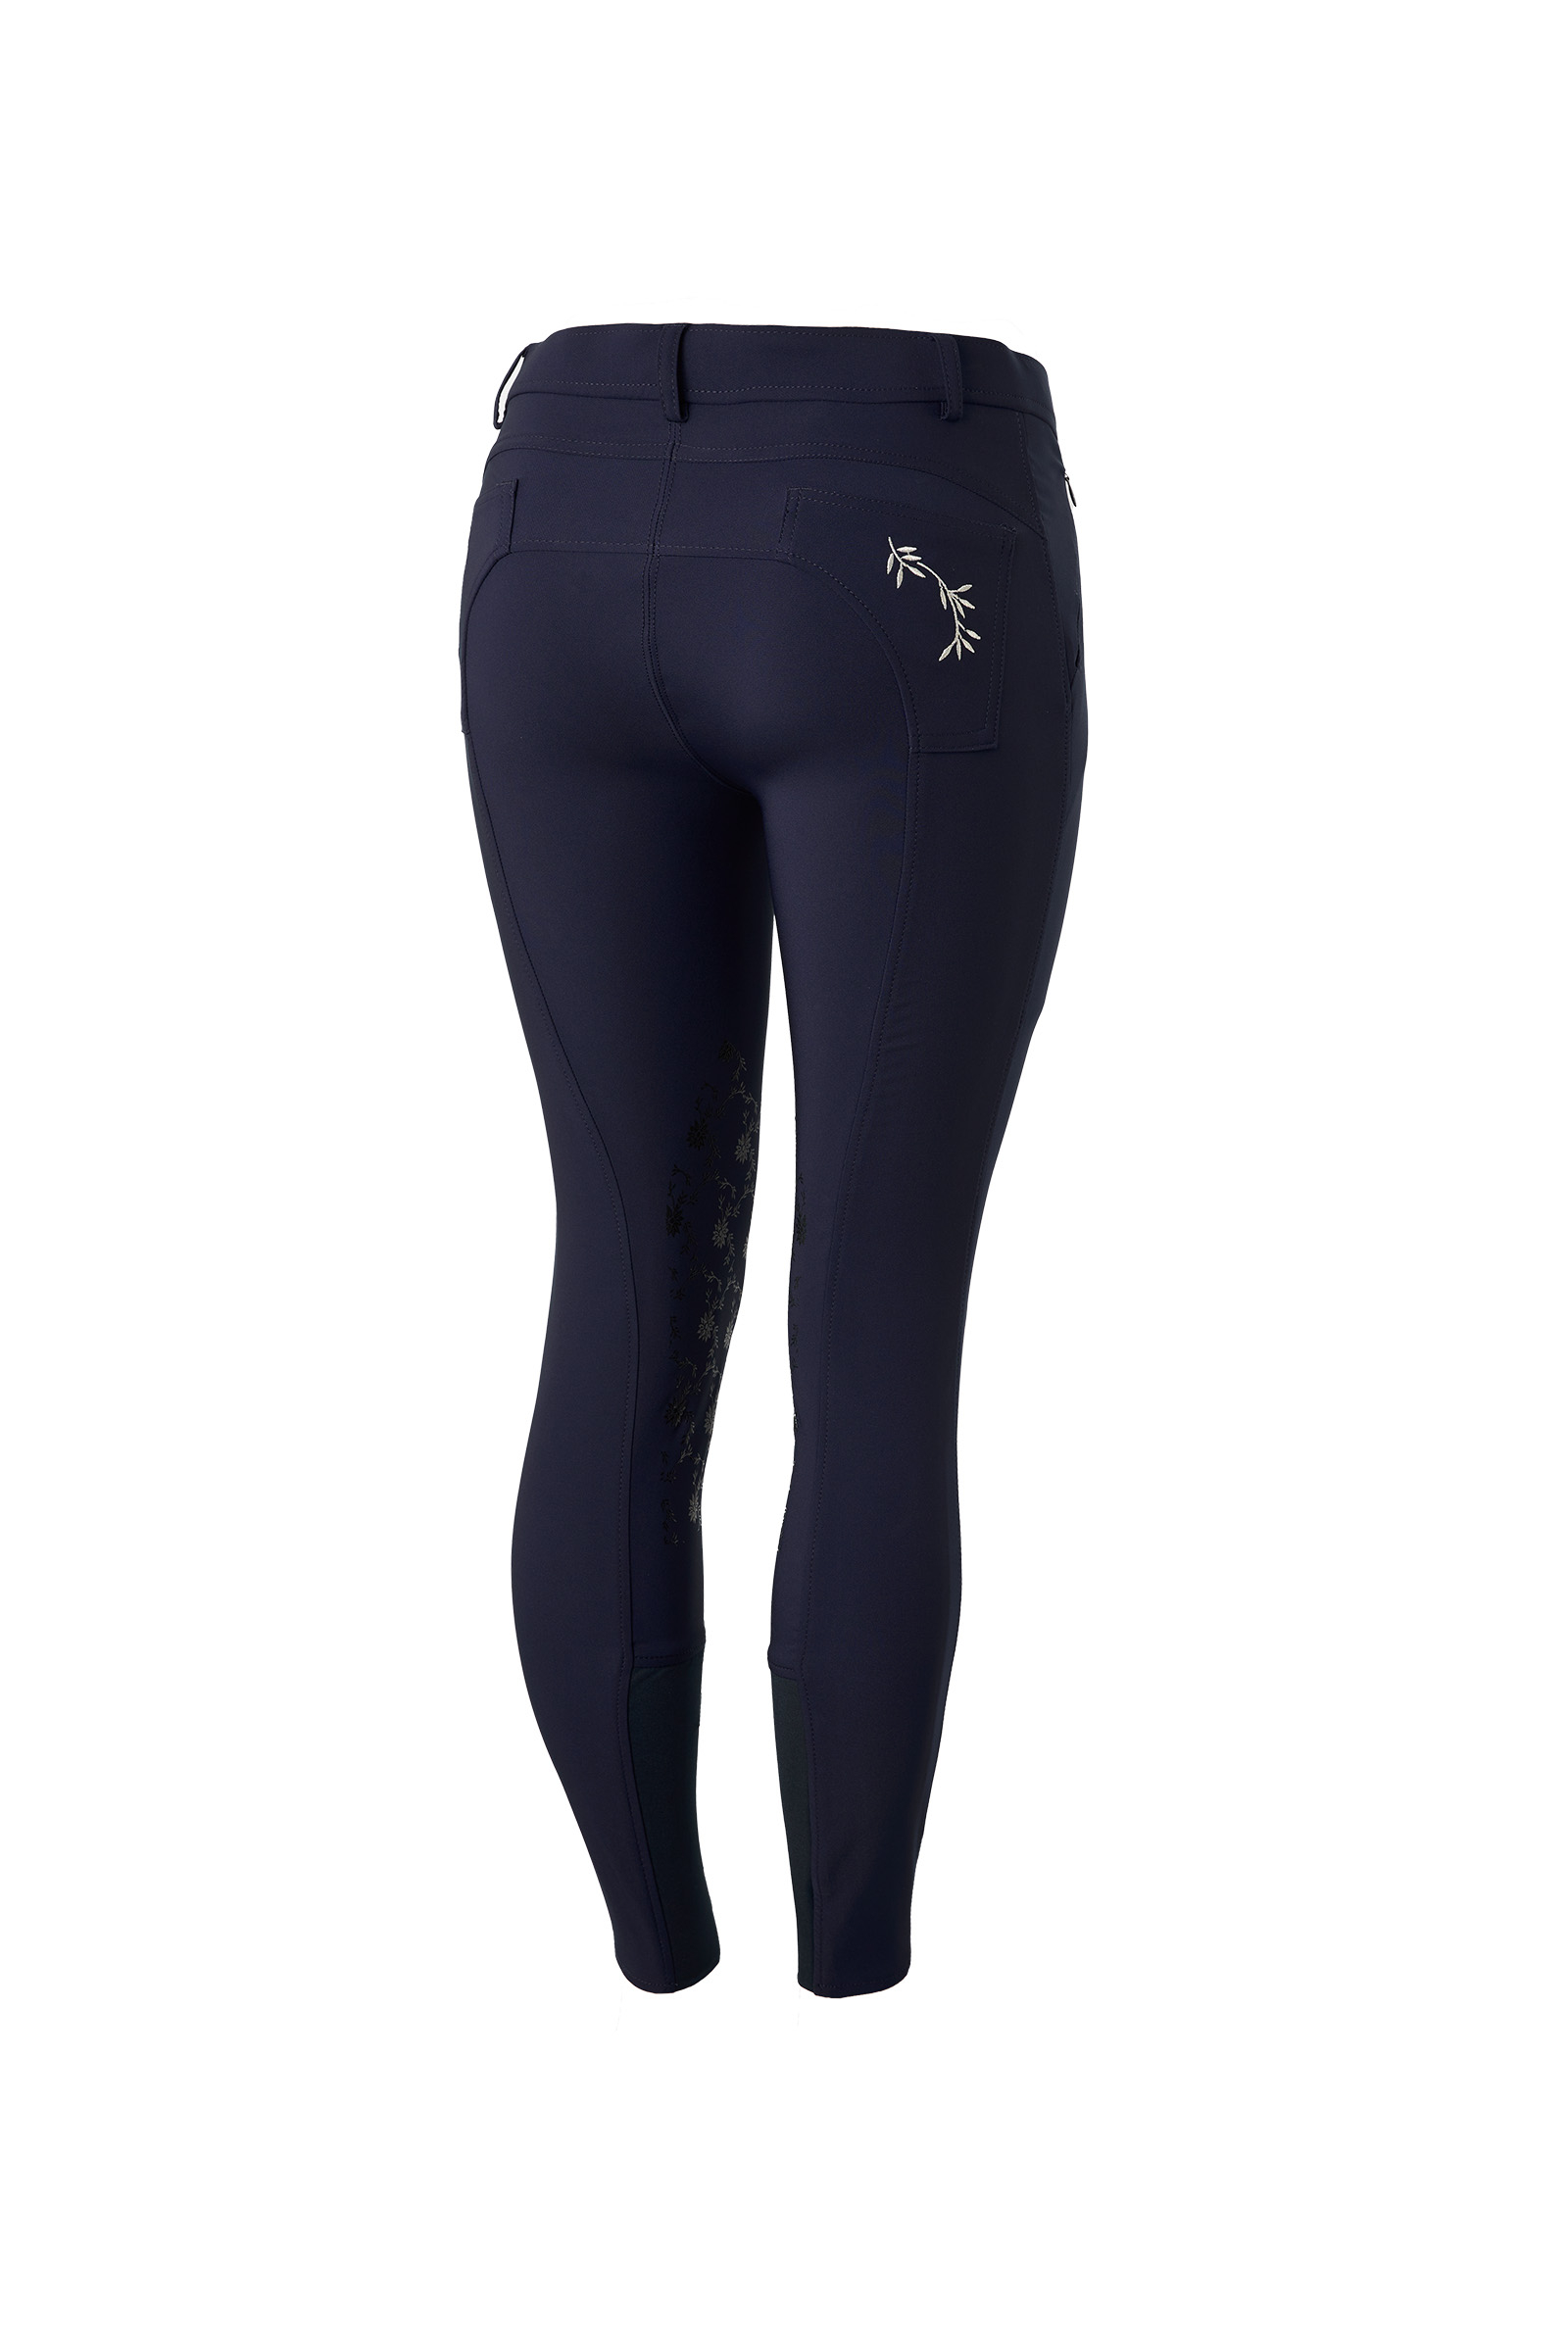 Buy affordable Women's Knee Patch Breeches now